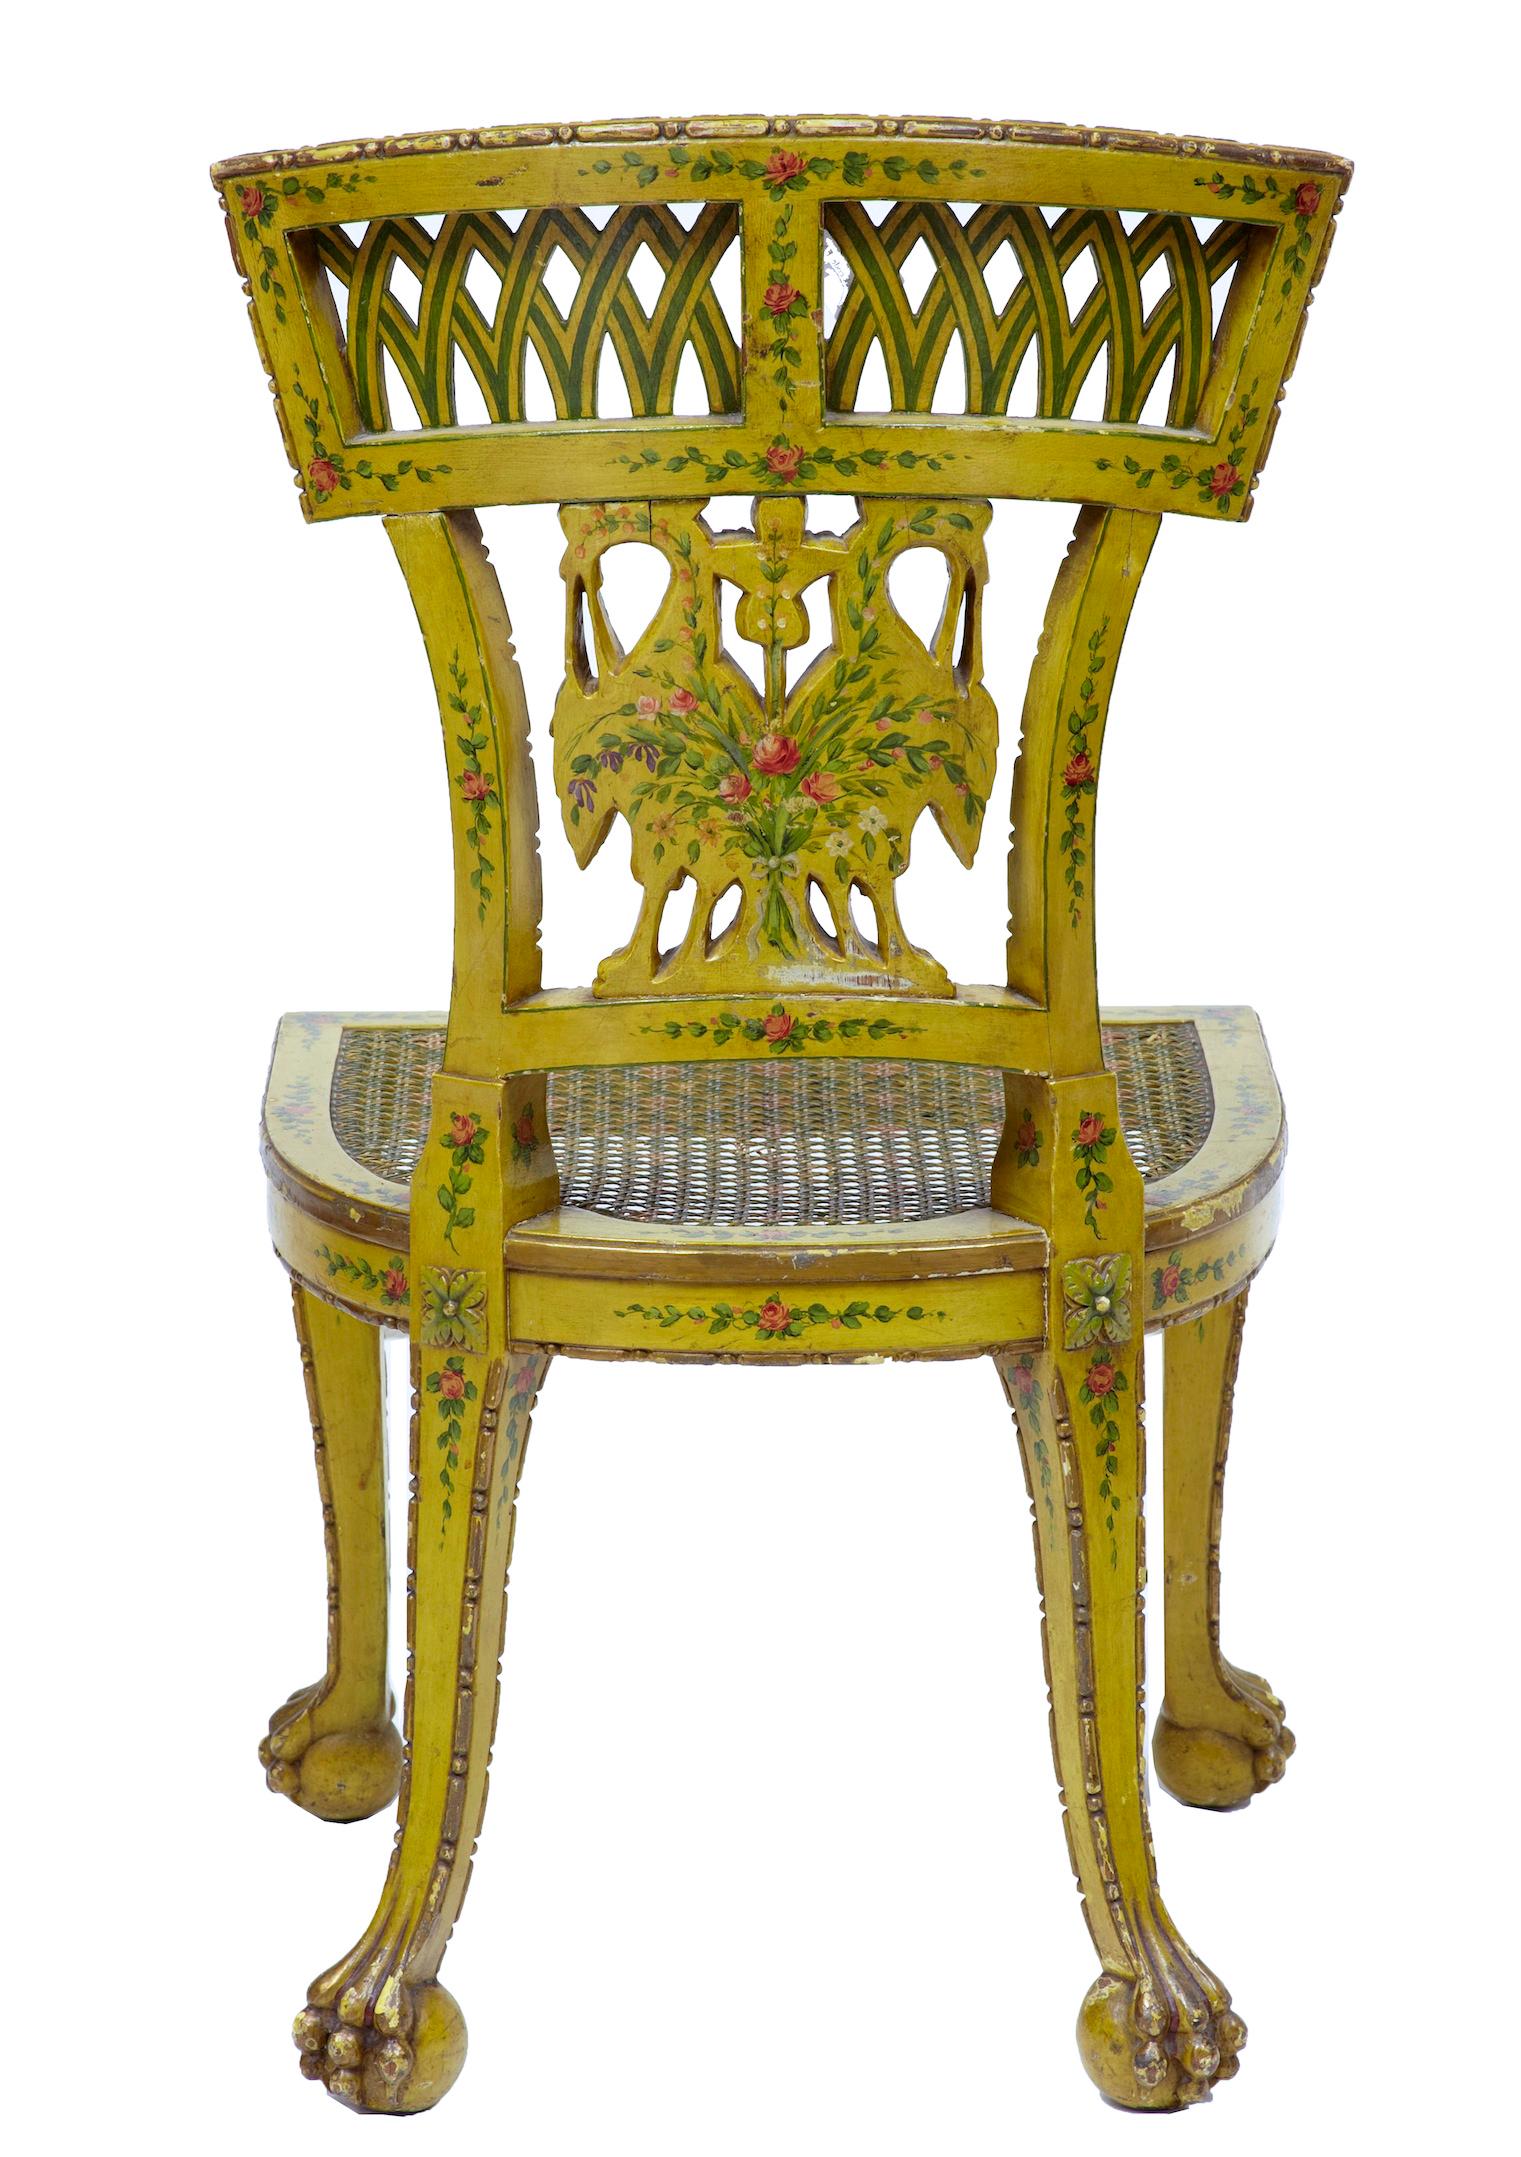 Hand-Painted 19th Century Biedermeier Carved and Painted Cane Chair